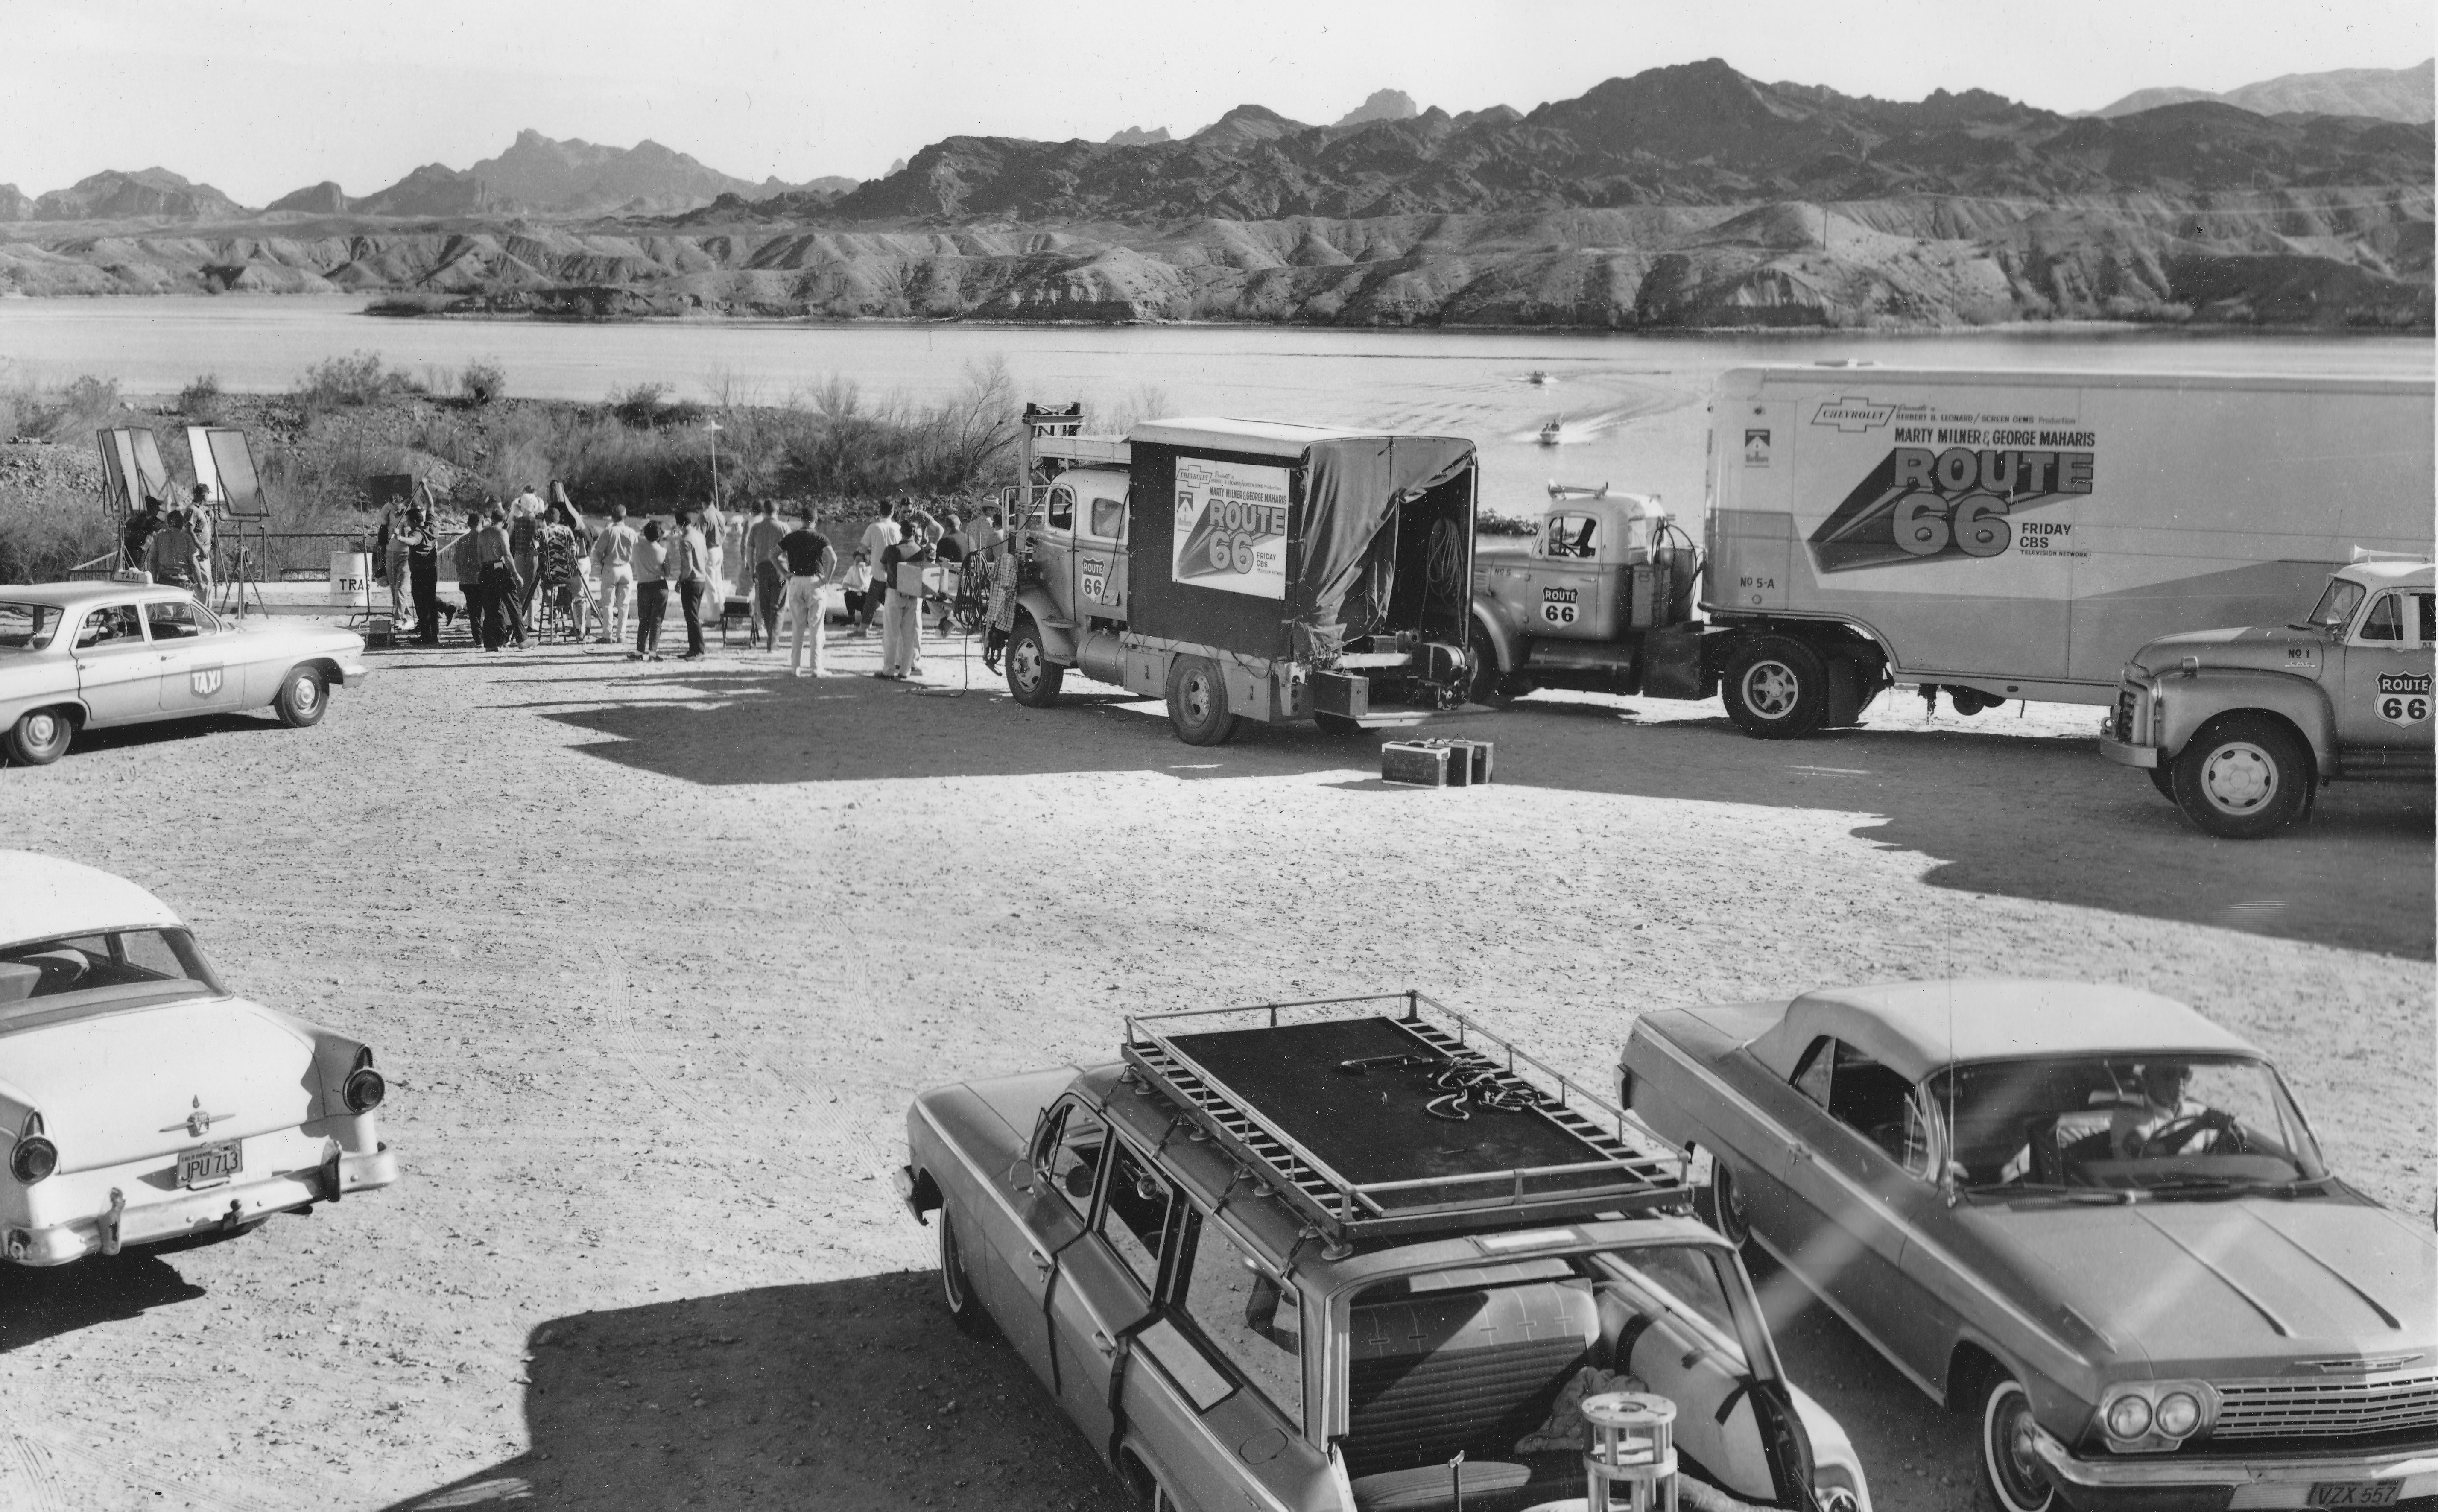 filming of route 66 tv show at lhc | lake havasu city history page